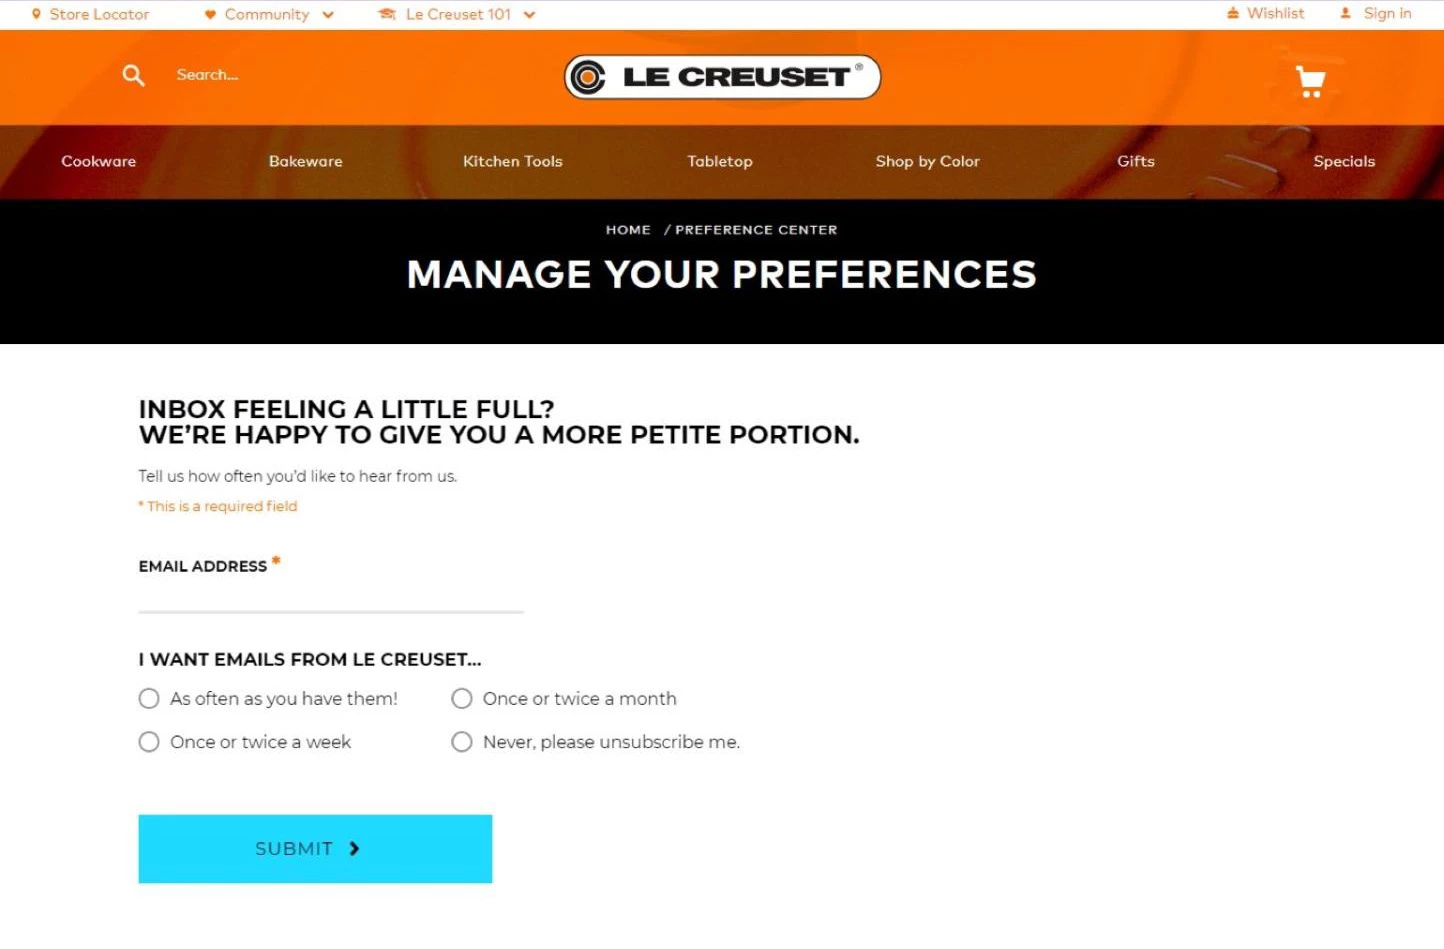 Le Creuset unsubscribe page example